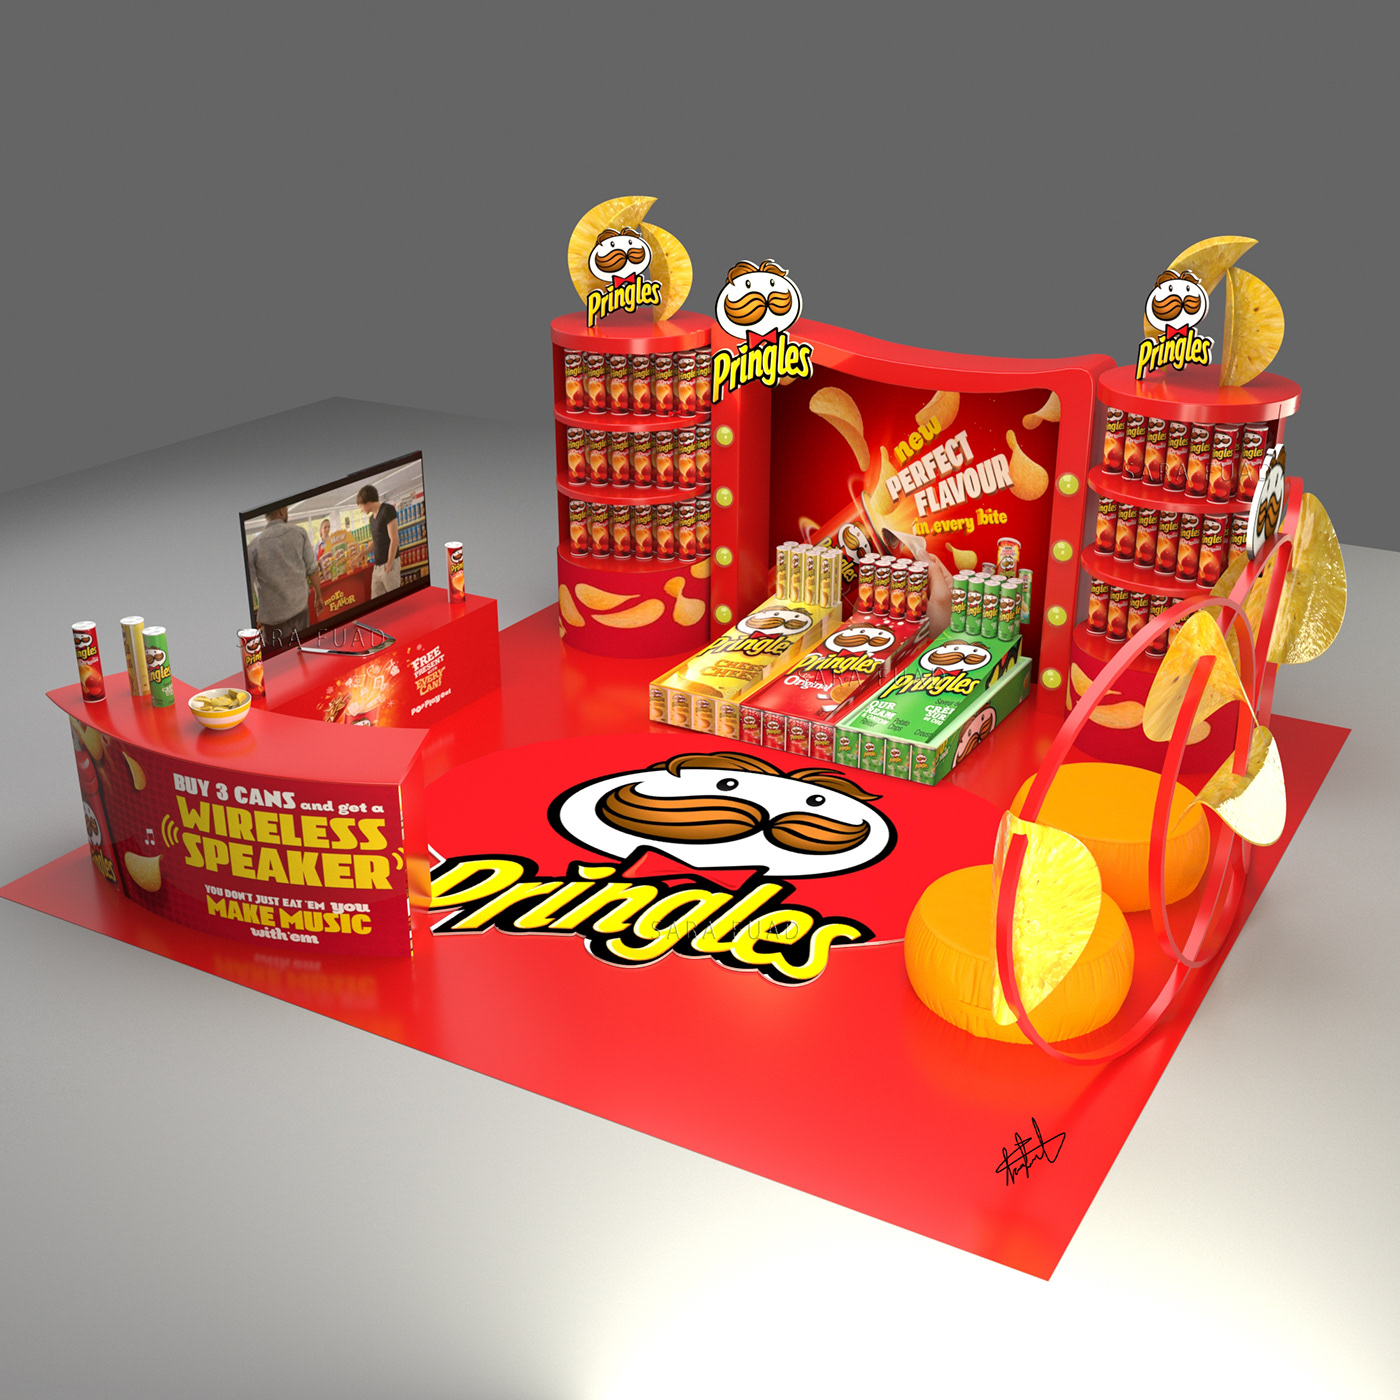 Pringles Booth on Behance